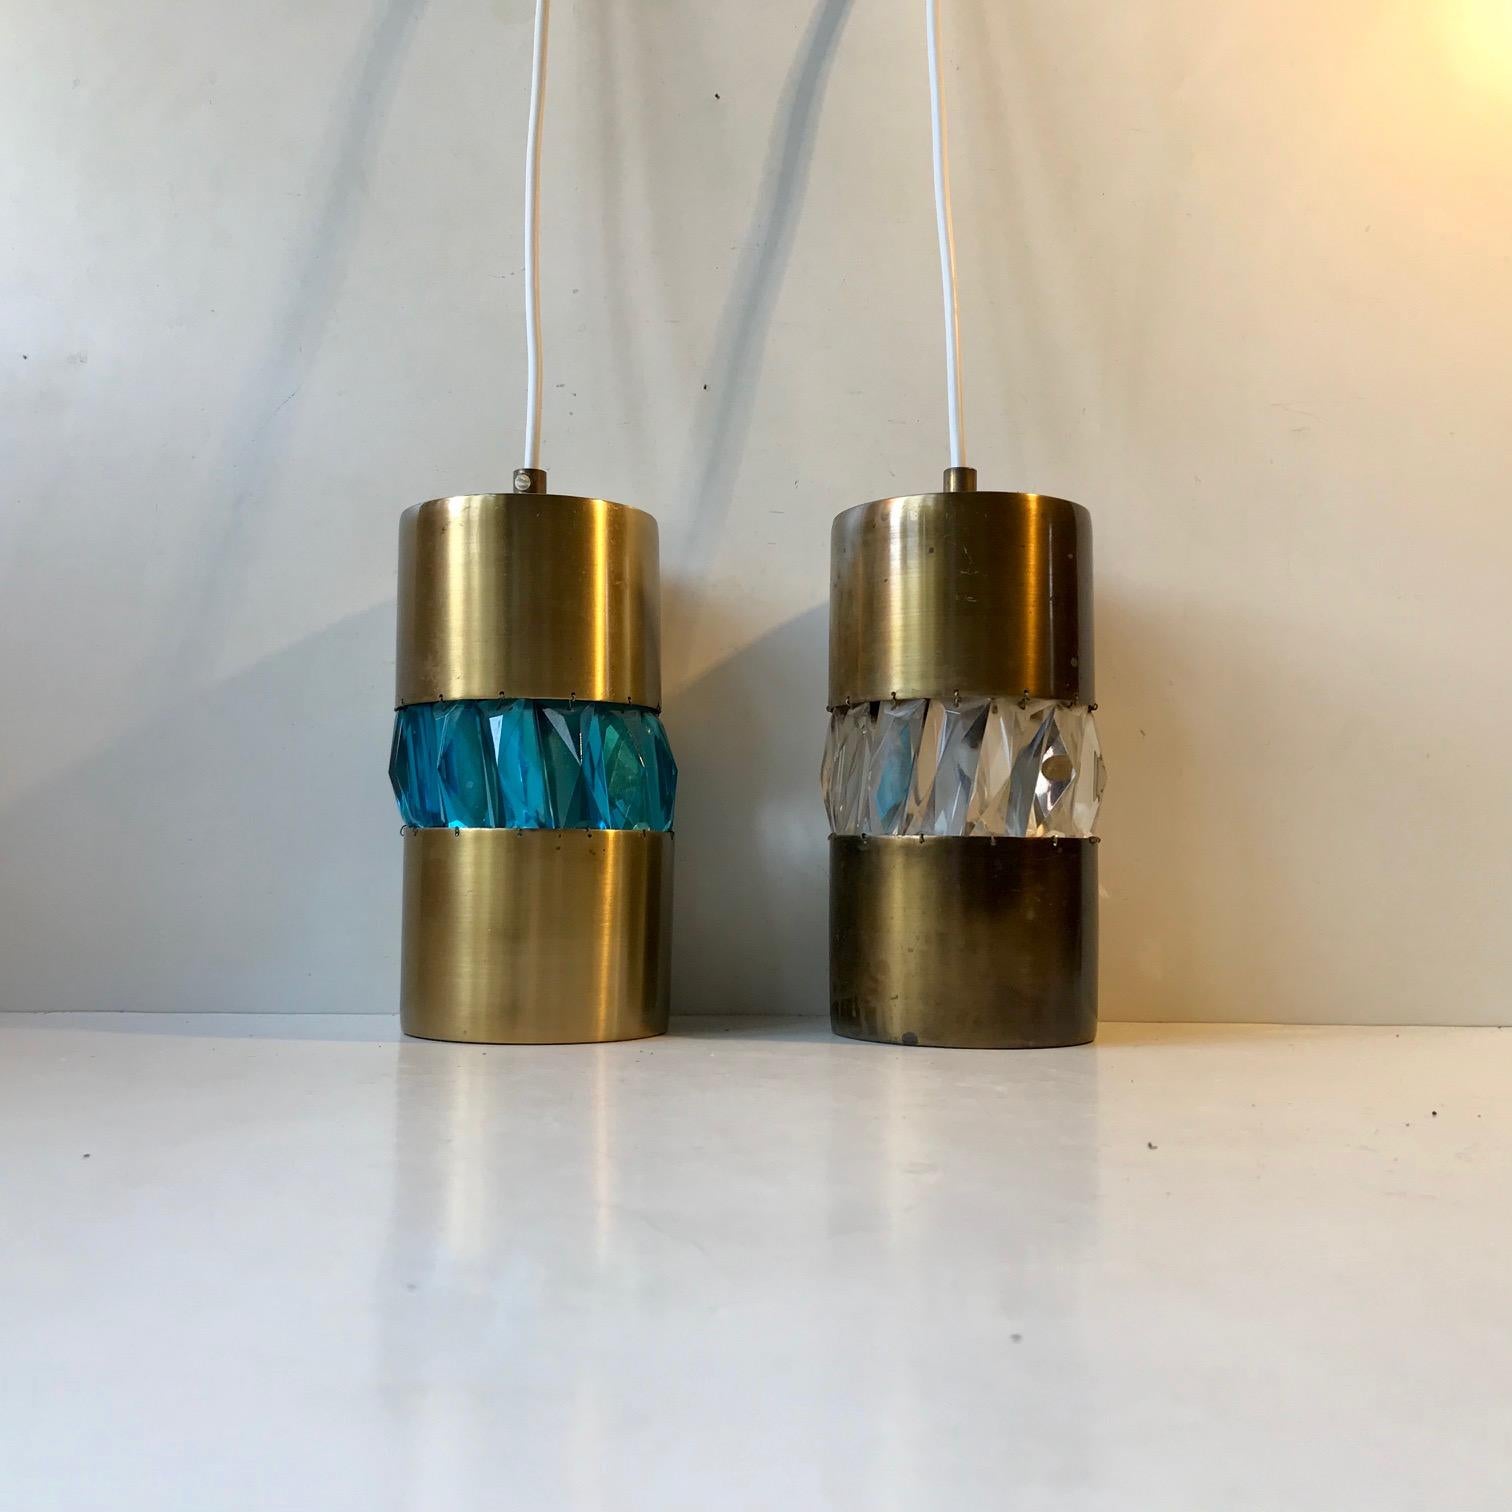 A pair of cylindrical pendant lights in solid patinated brass. Both with a perimeter band of Bohemian Crystals. One clear and one with light blue. A few of the crystals are labeled 'Bohemian Crystal' but whether these lights are made in Scandinavia